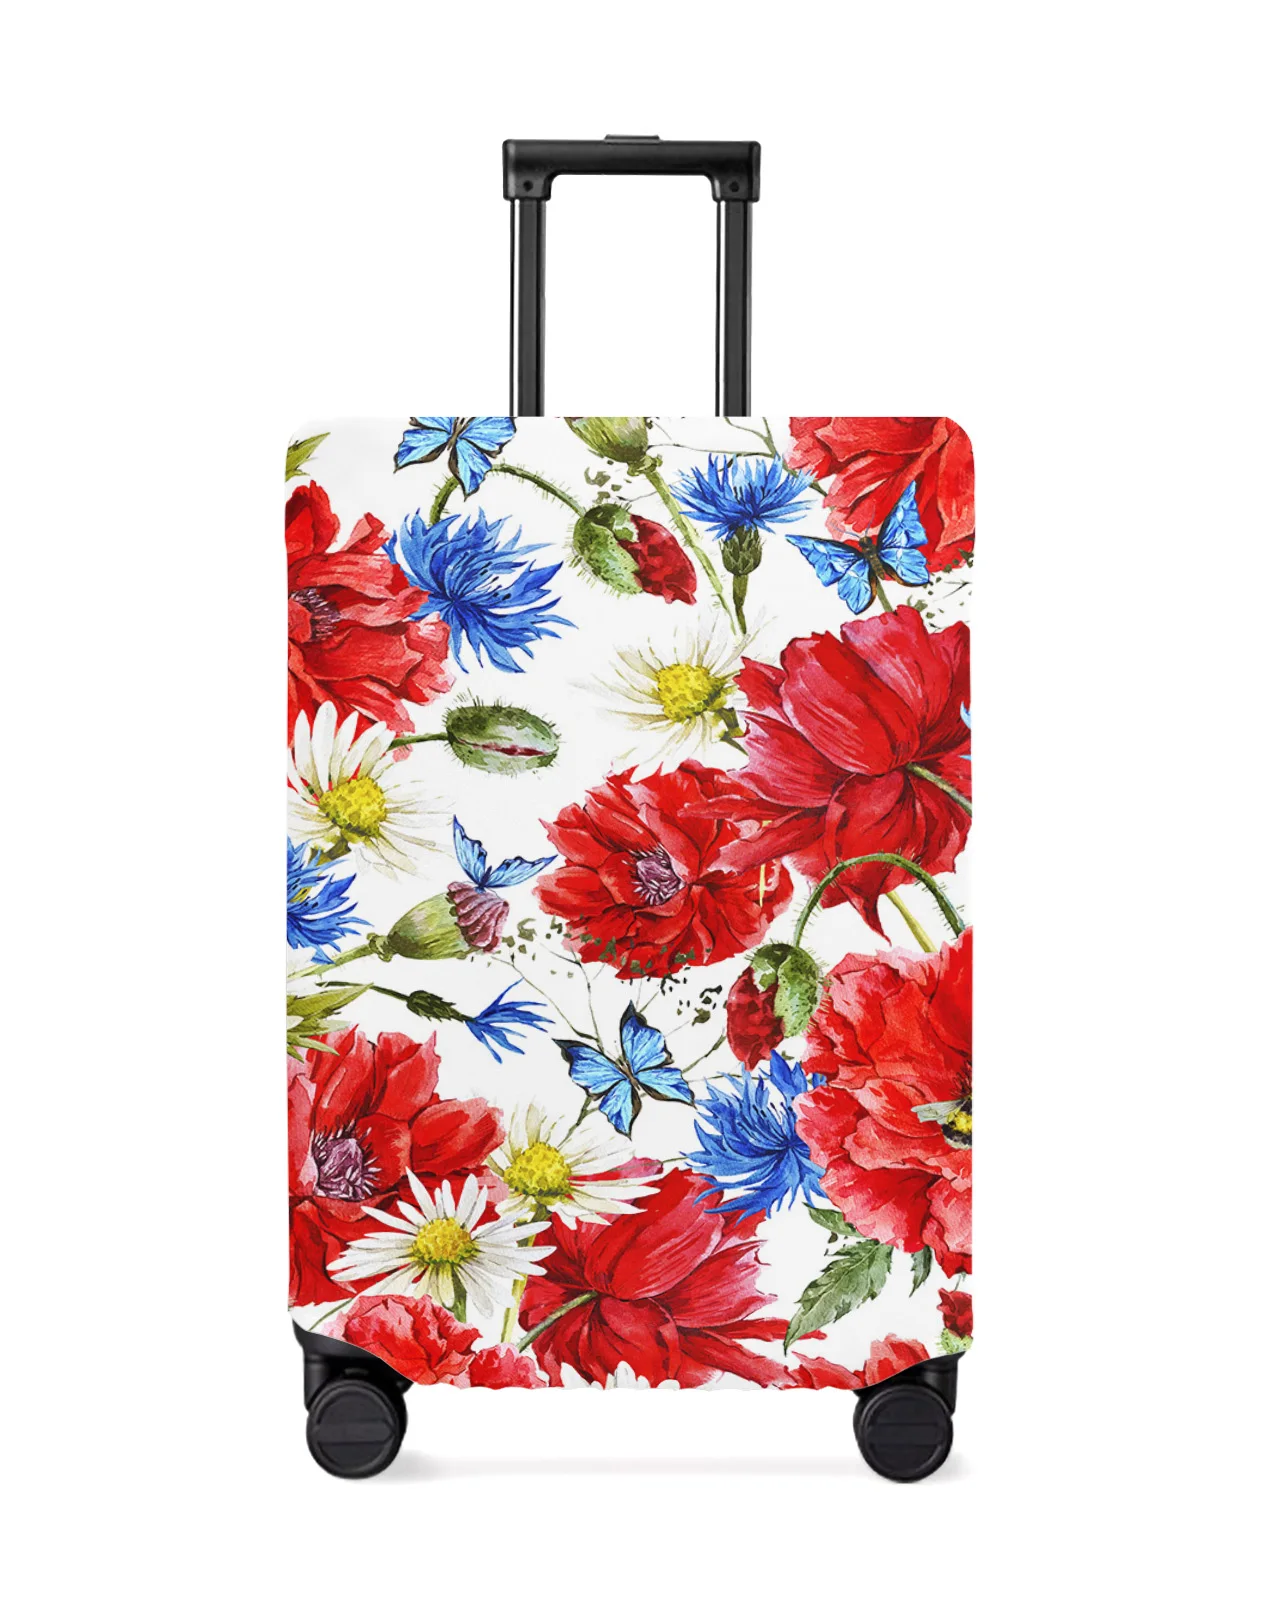 red-poppy-daisy-flower-travel-luggage-protective-cover-for-travel-accessories-suitcase-elastic-dust-case-protect-sleeve